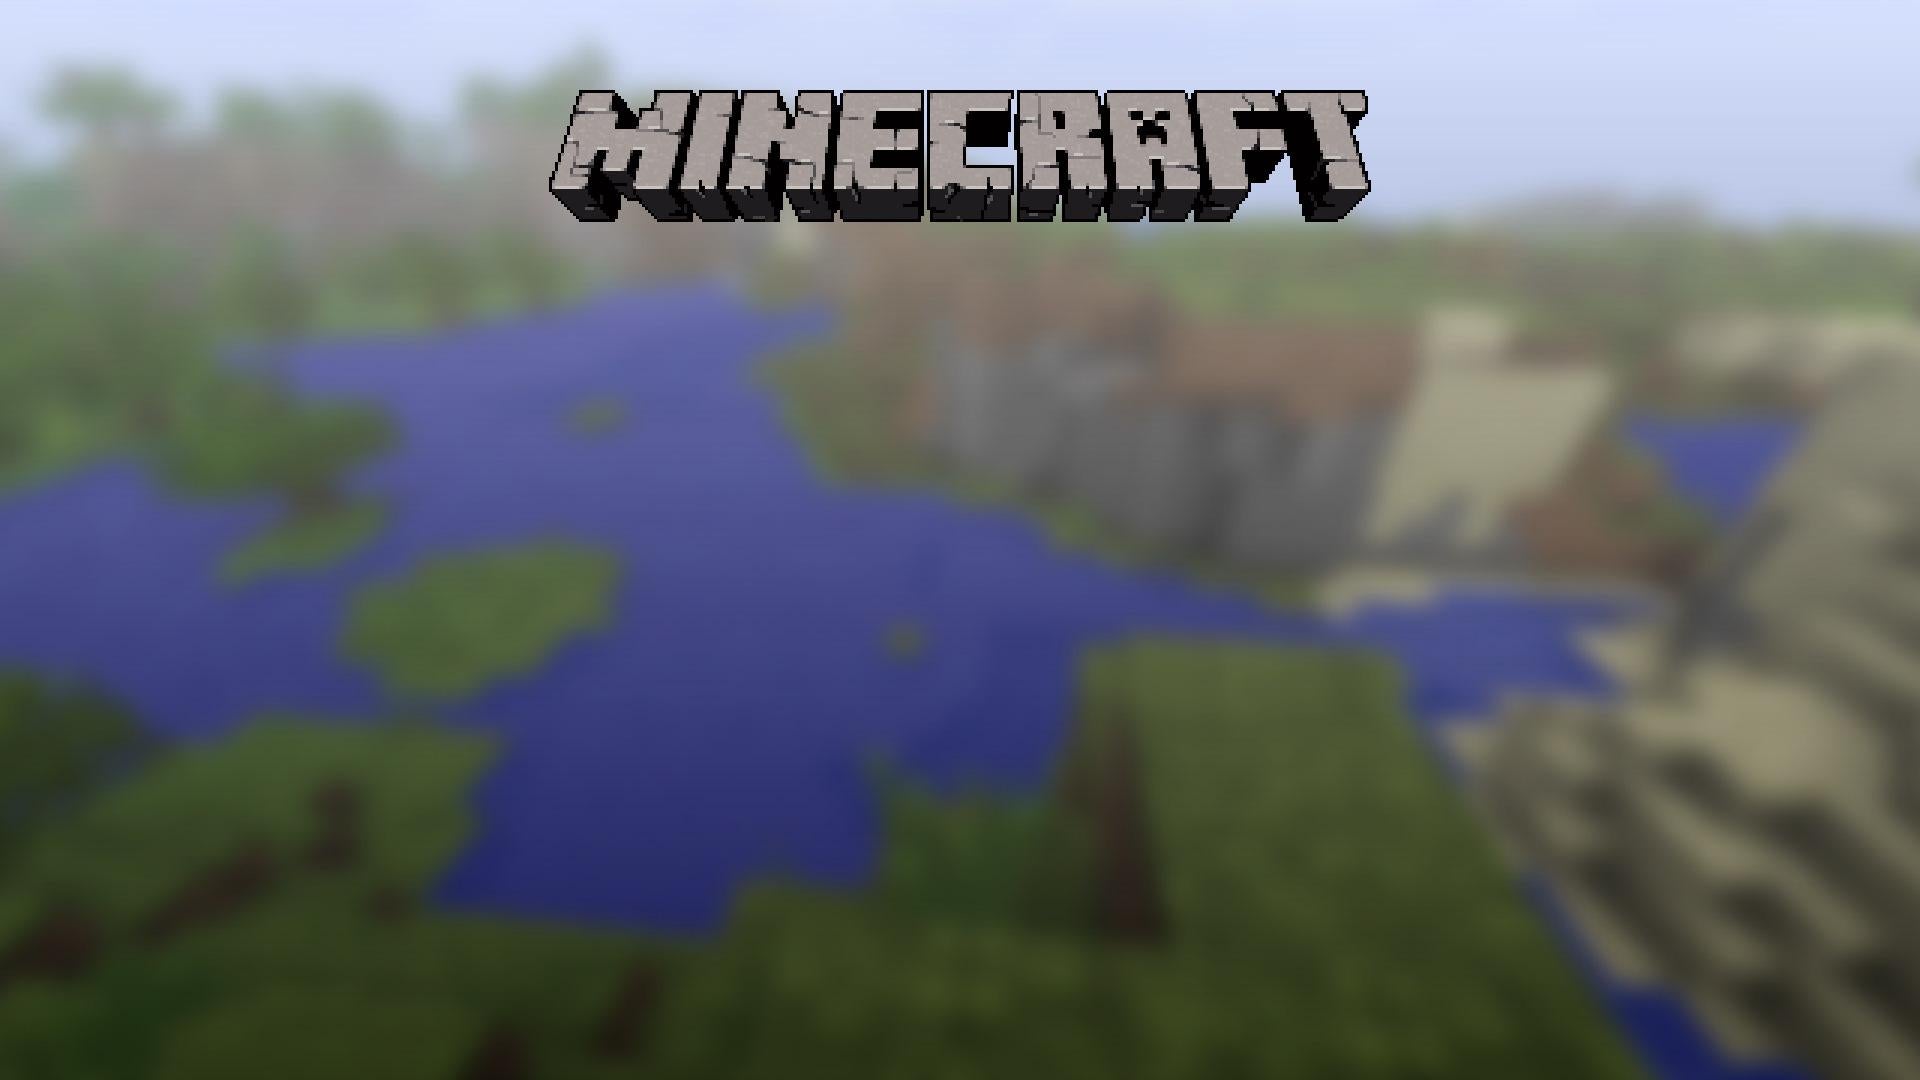 Minecraft title screen seed: What is the original title screen seed in Minecraft